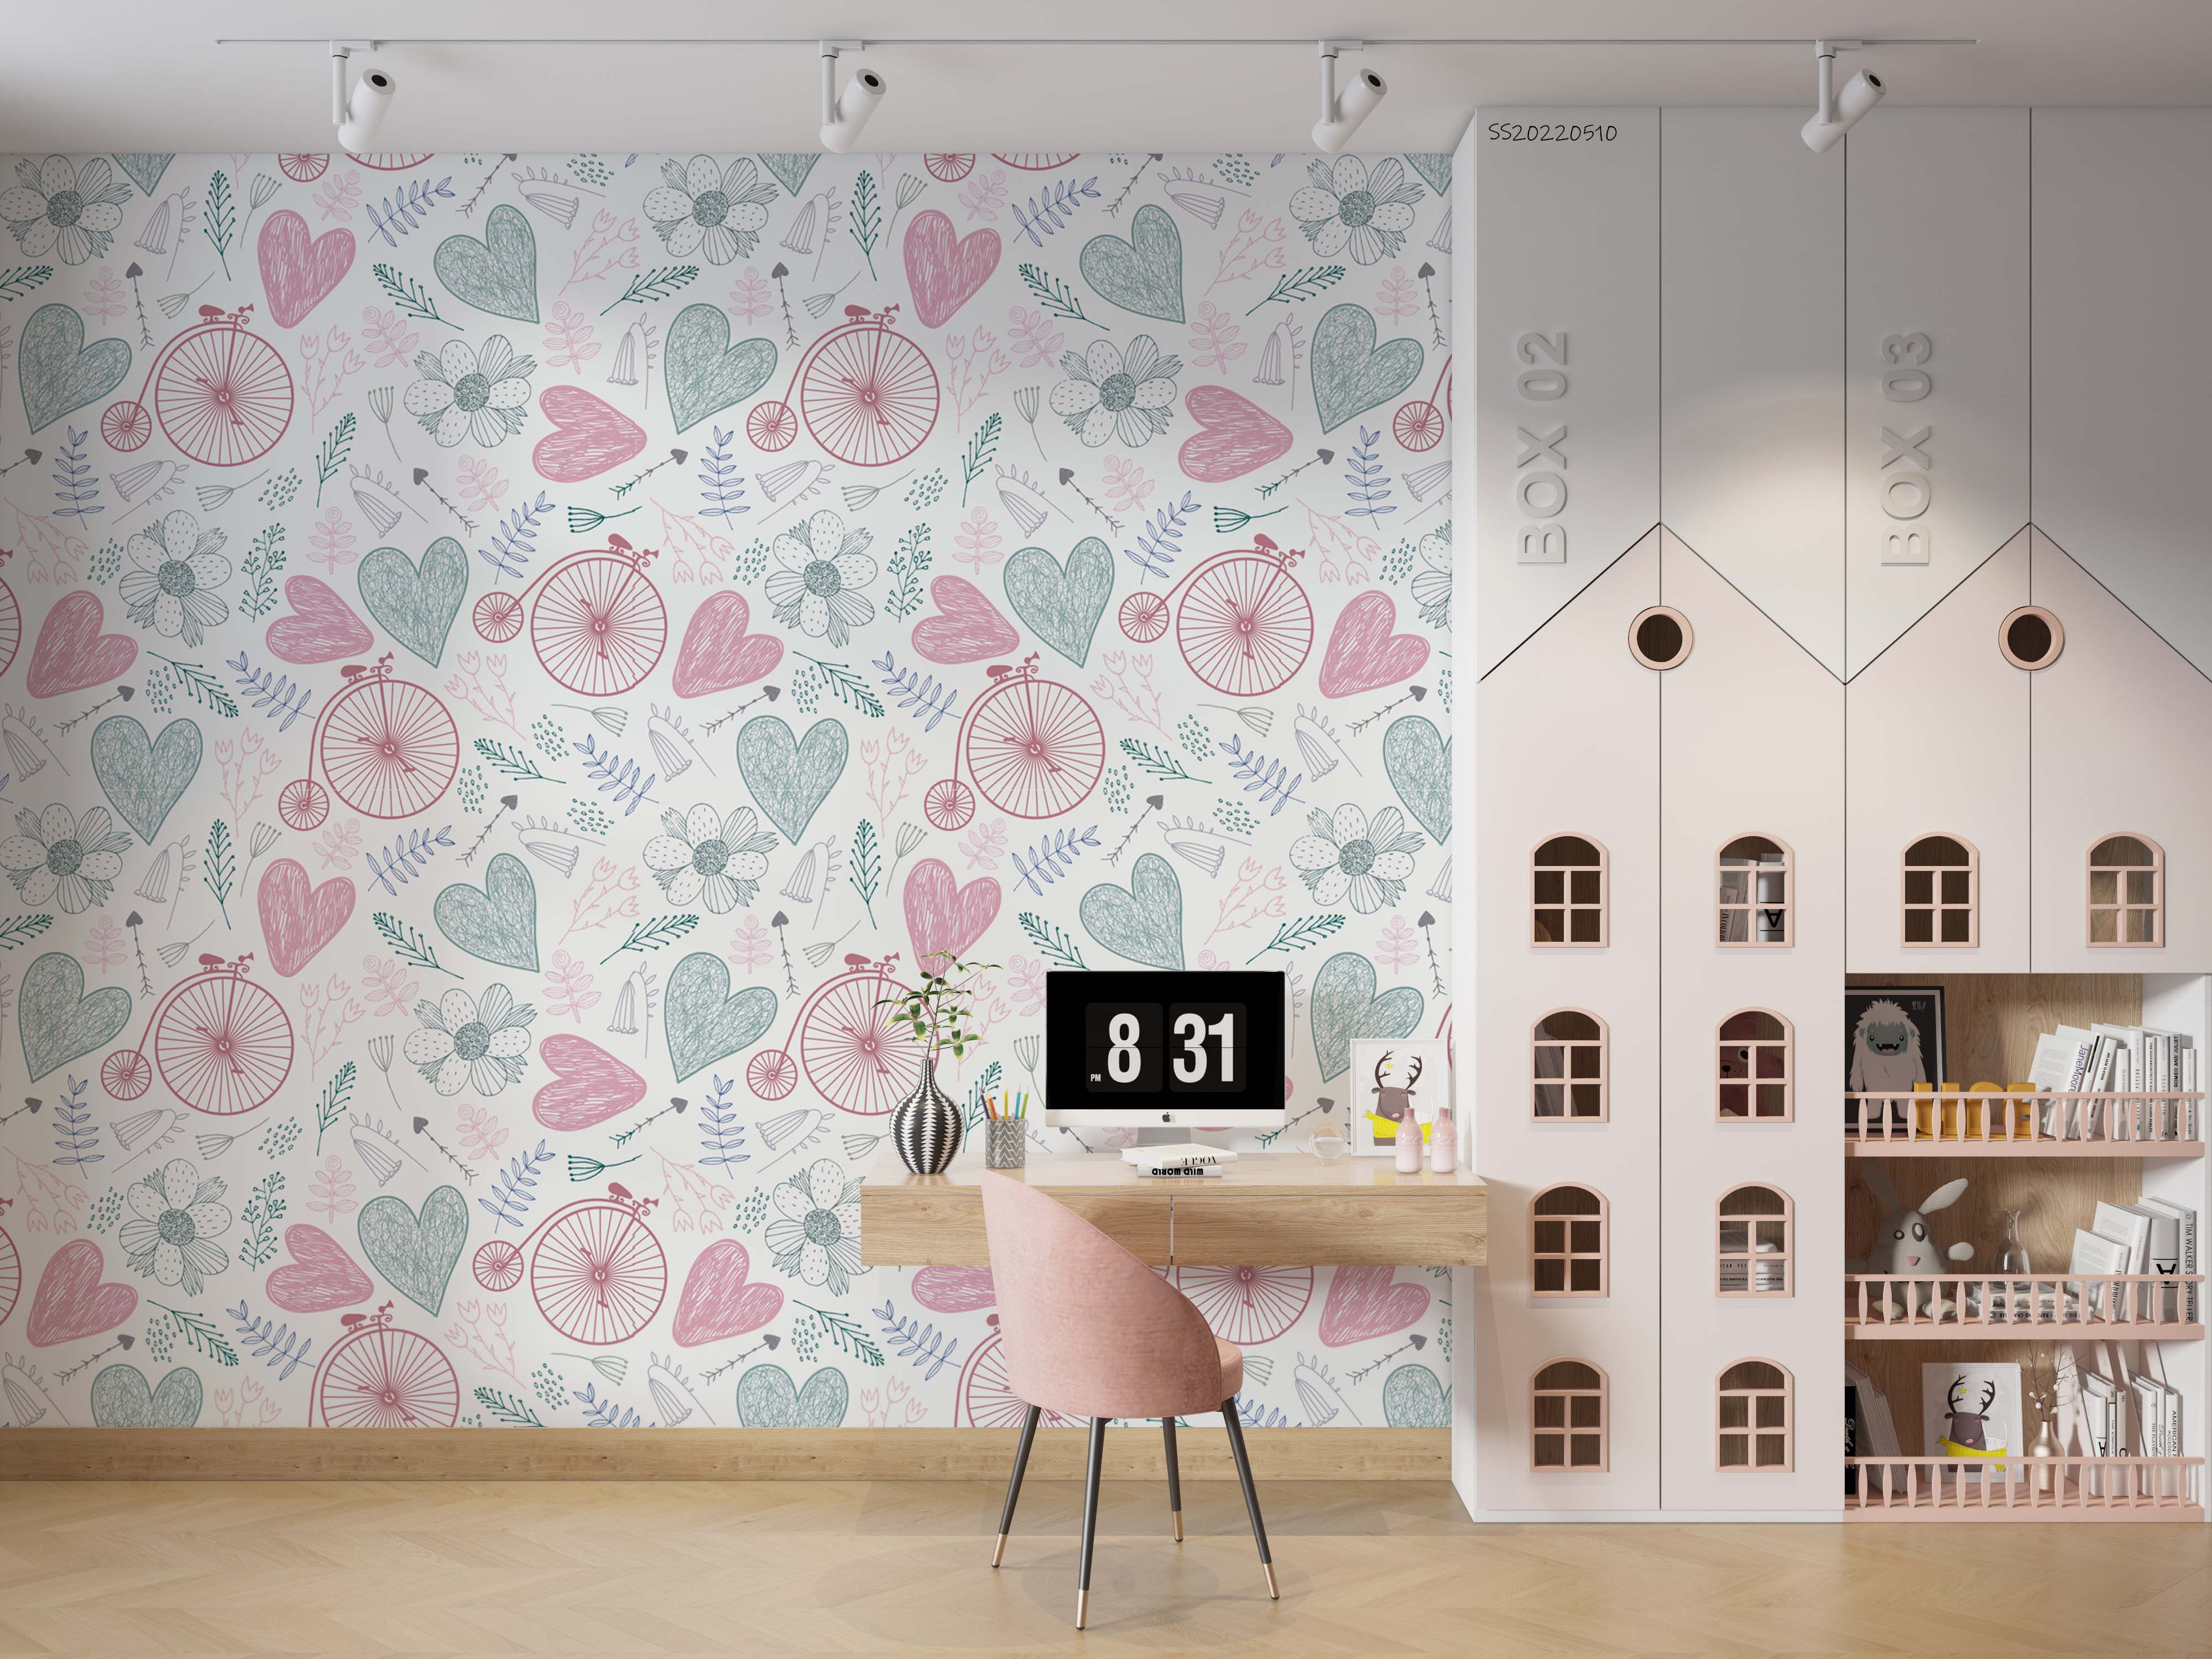 3D Heart Floral Vintage Bicycle Wall Mural Wallpaper GD 4035- Jess Art Decoration